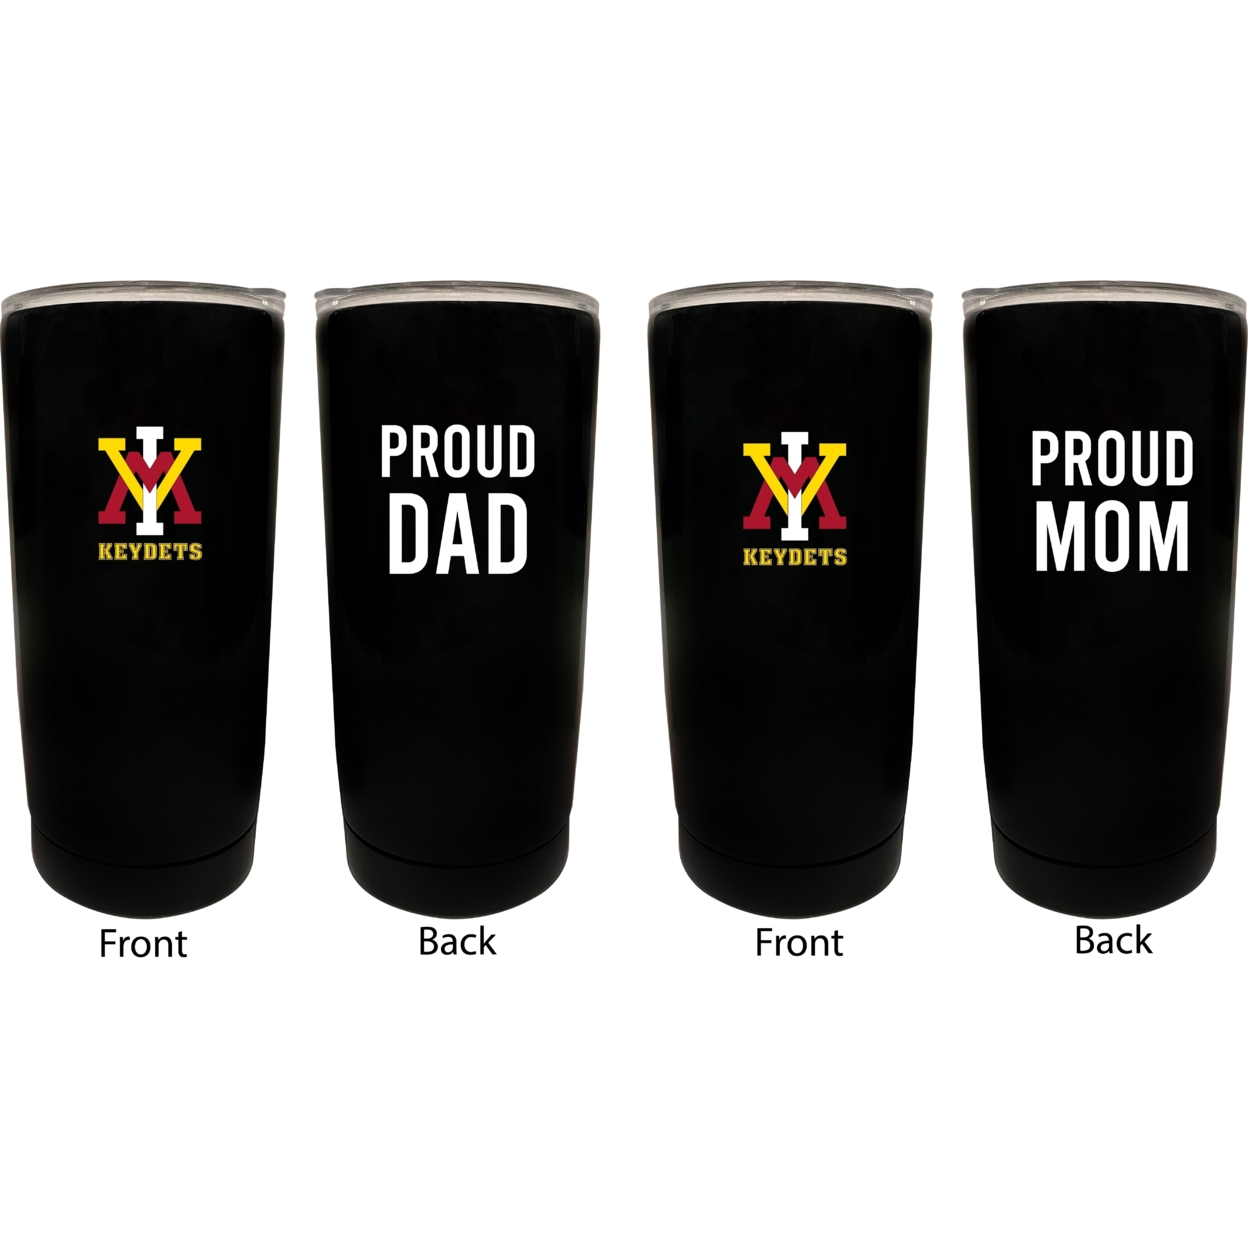 VMI Keydets Proud Mom And Dad 16 Oz Insulated Stainless Steel Tumblers 2 Pack Black.